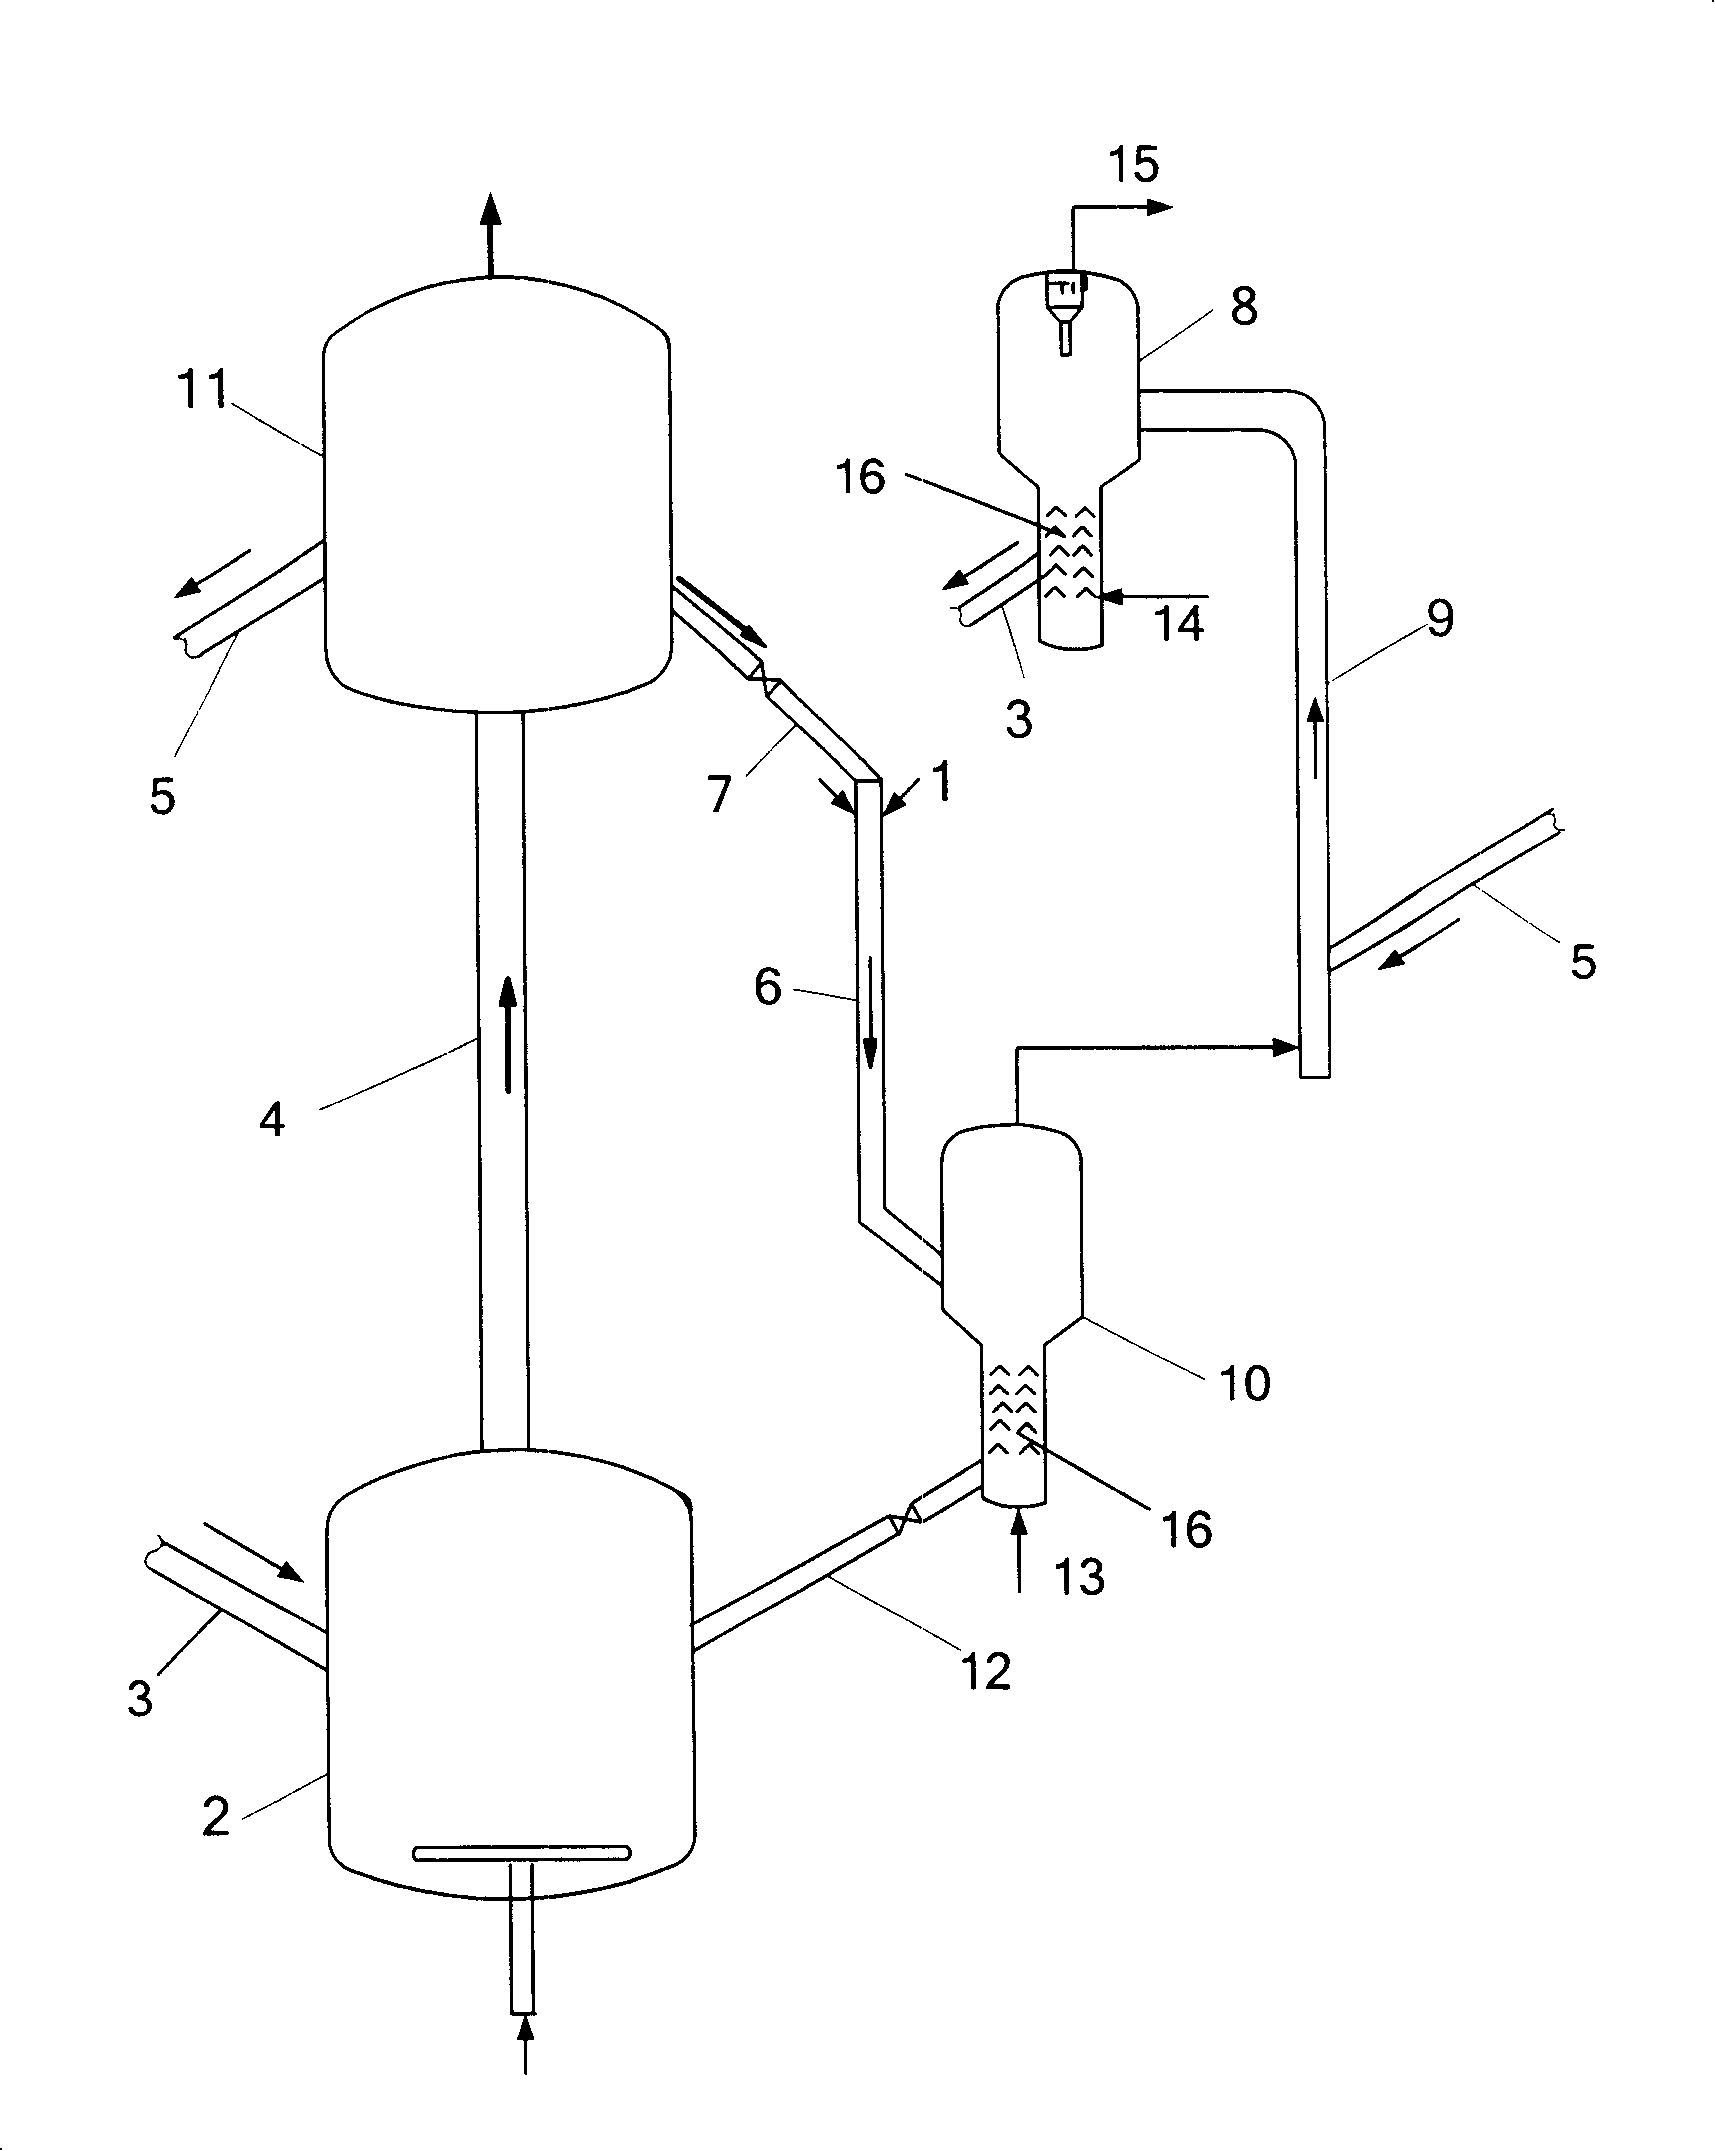 Descending reactor and riser reactor serially connected catalytic cracking method